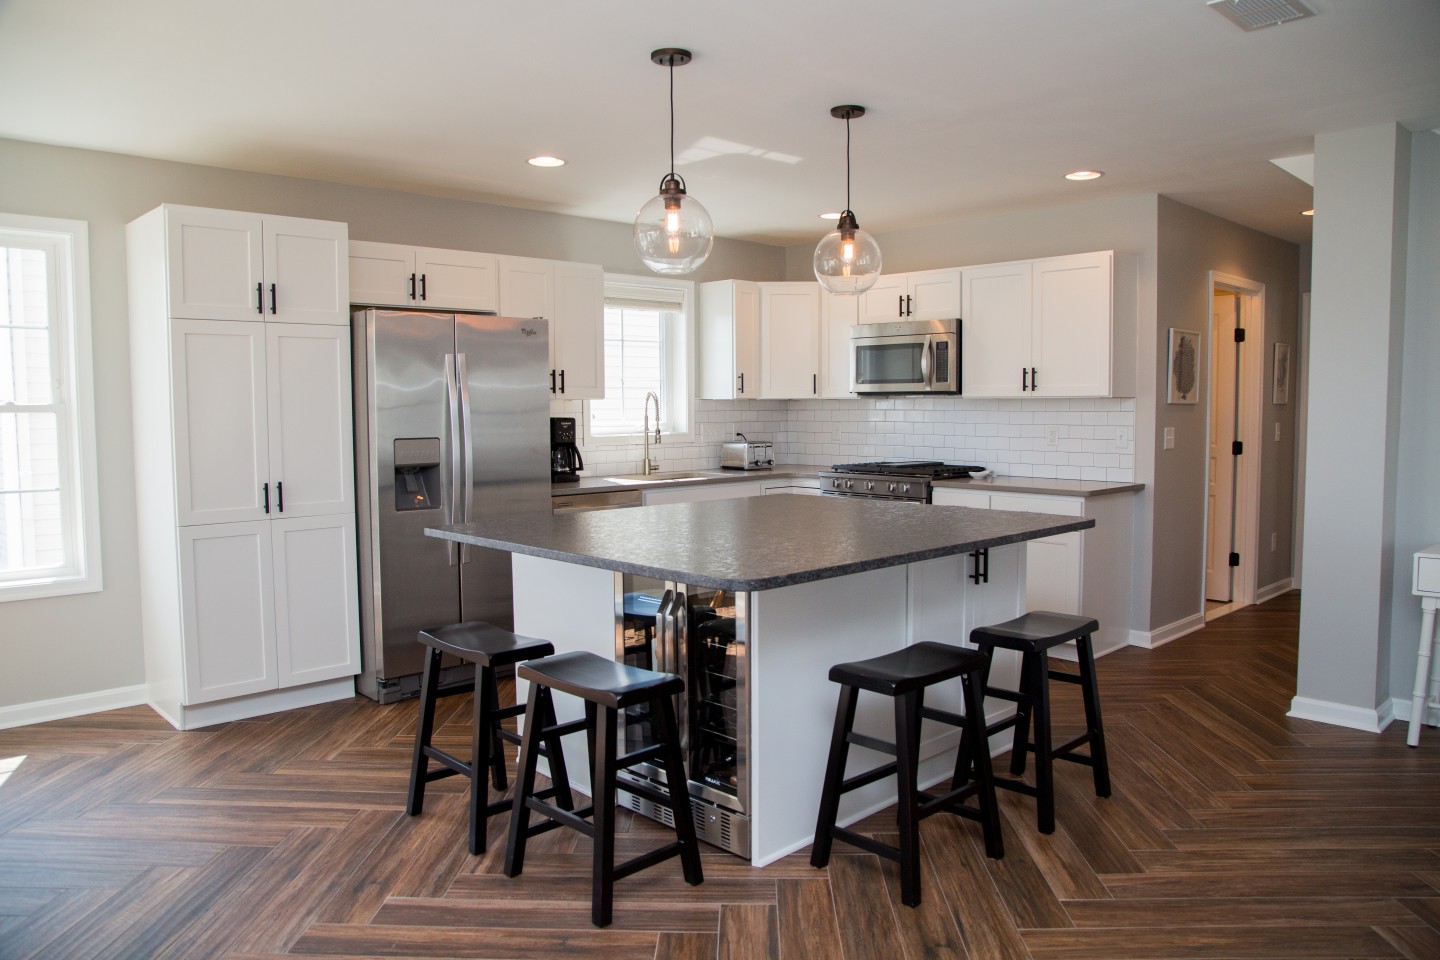 Contemporary Kitchen with White Cabinets, Dark Flooring and Center Isle